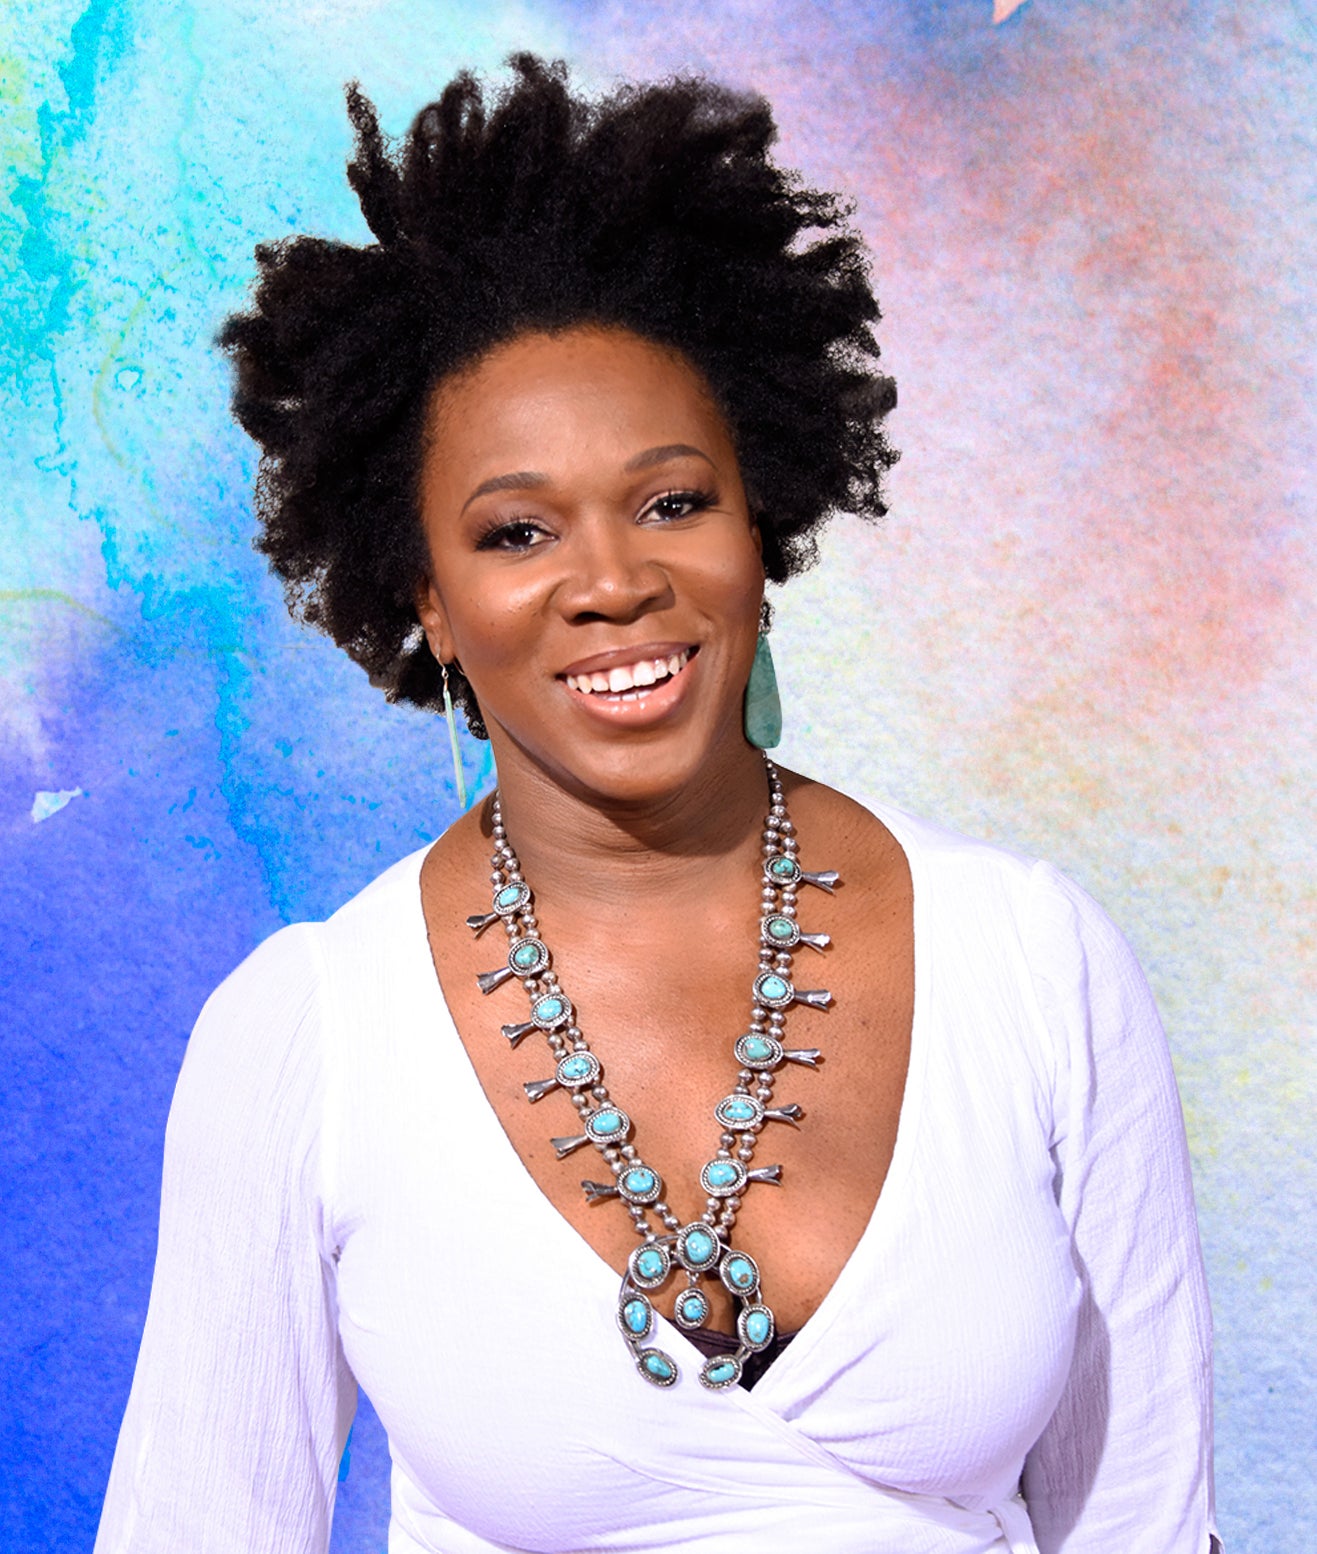 India Arie’s New Song 'Breathe' (Inspired by #BlackLivesMatter) Is Right on Time!
